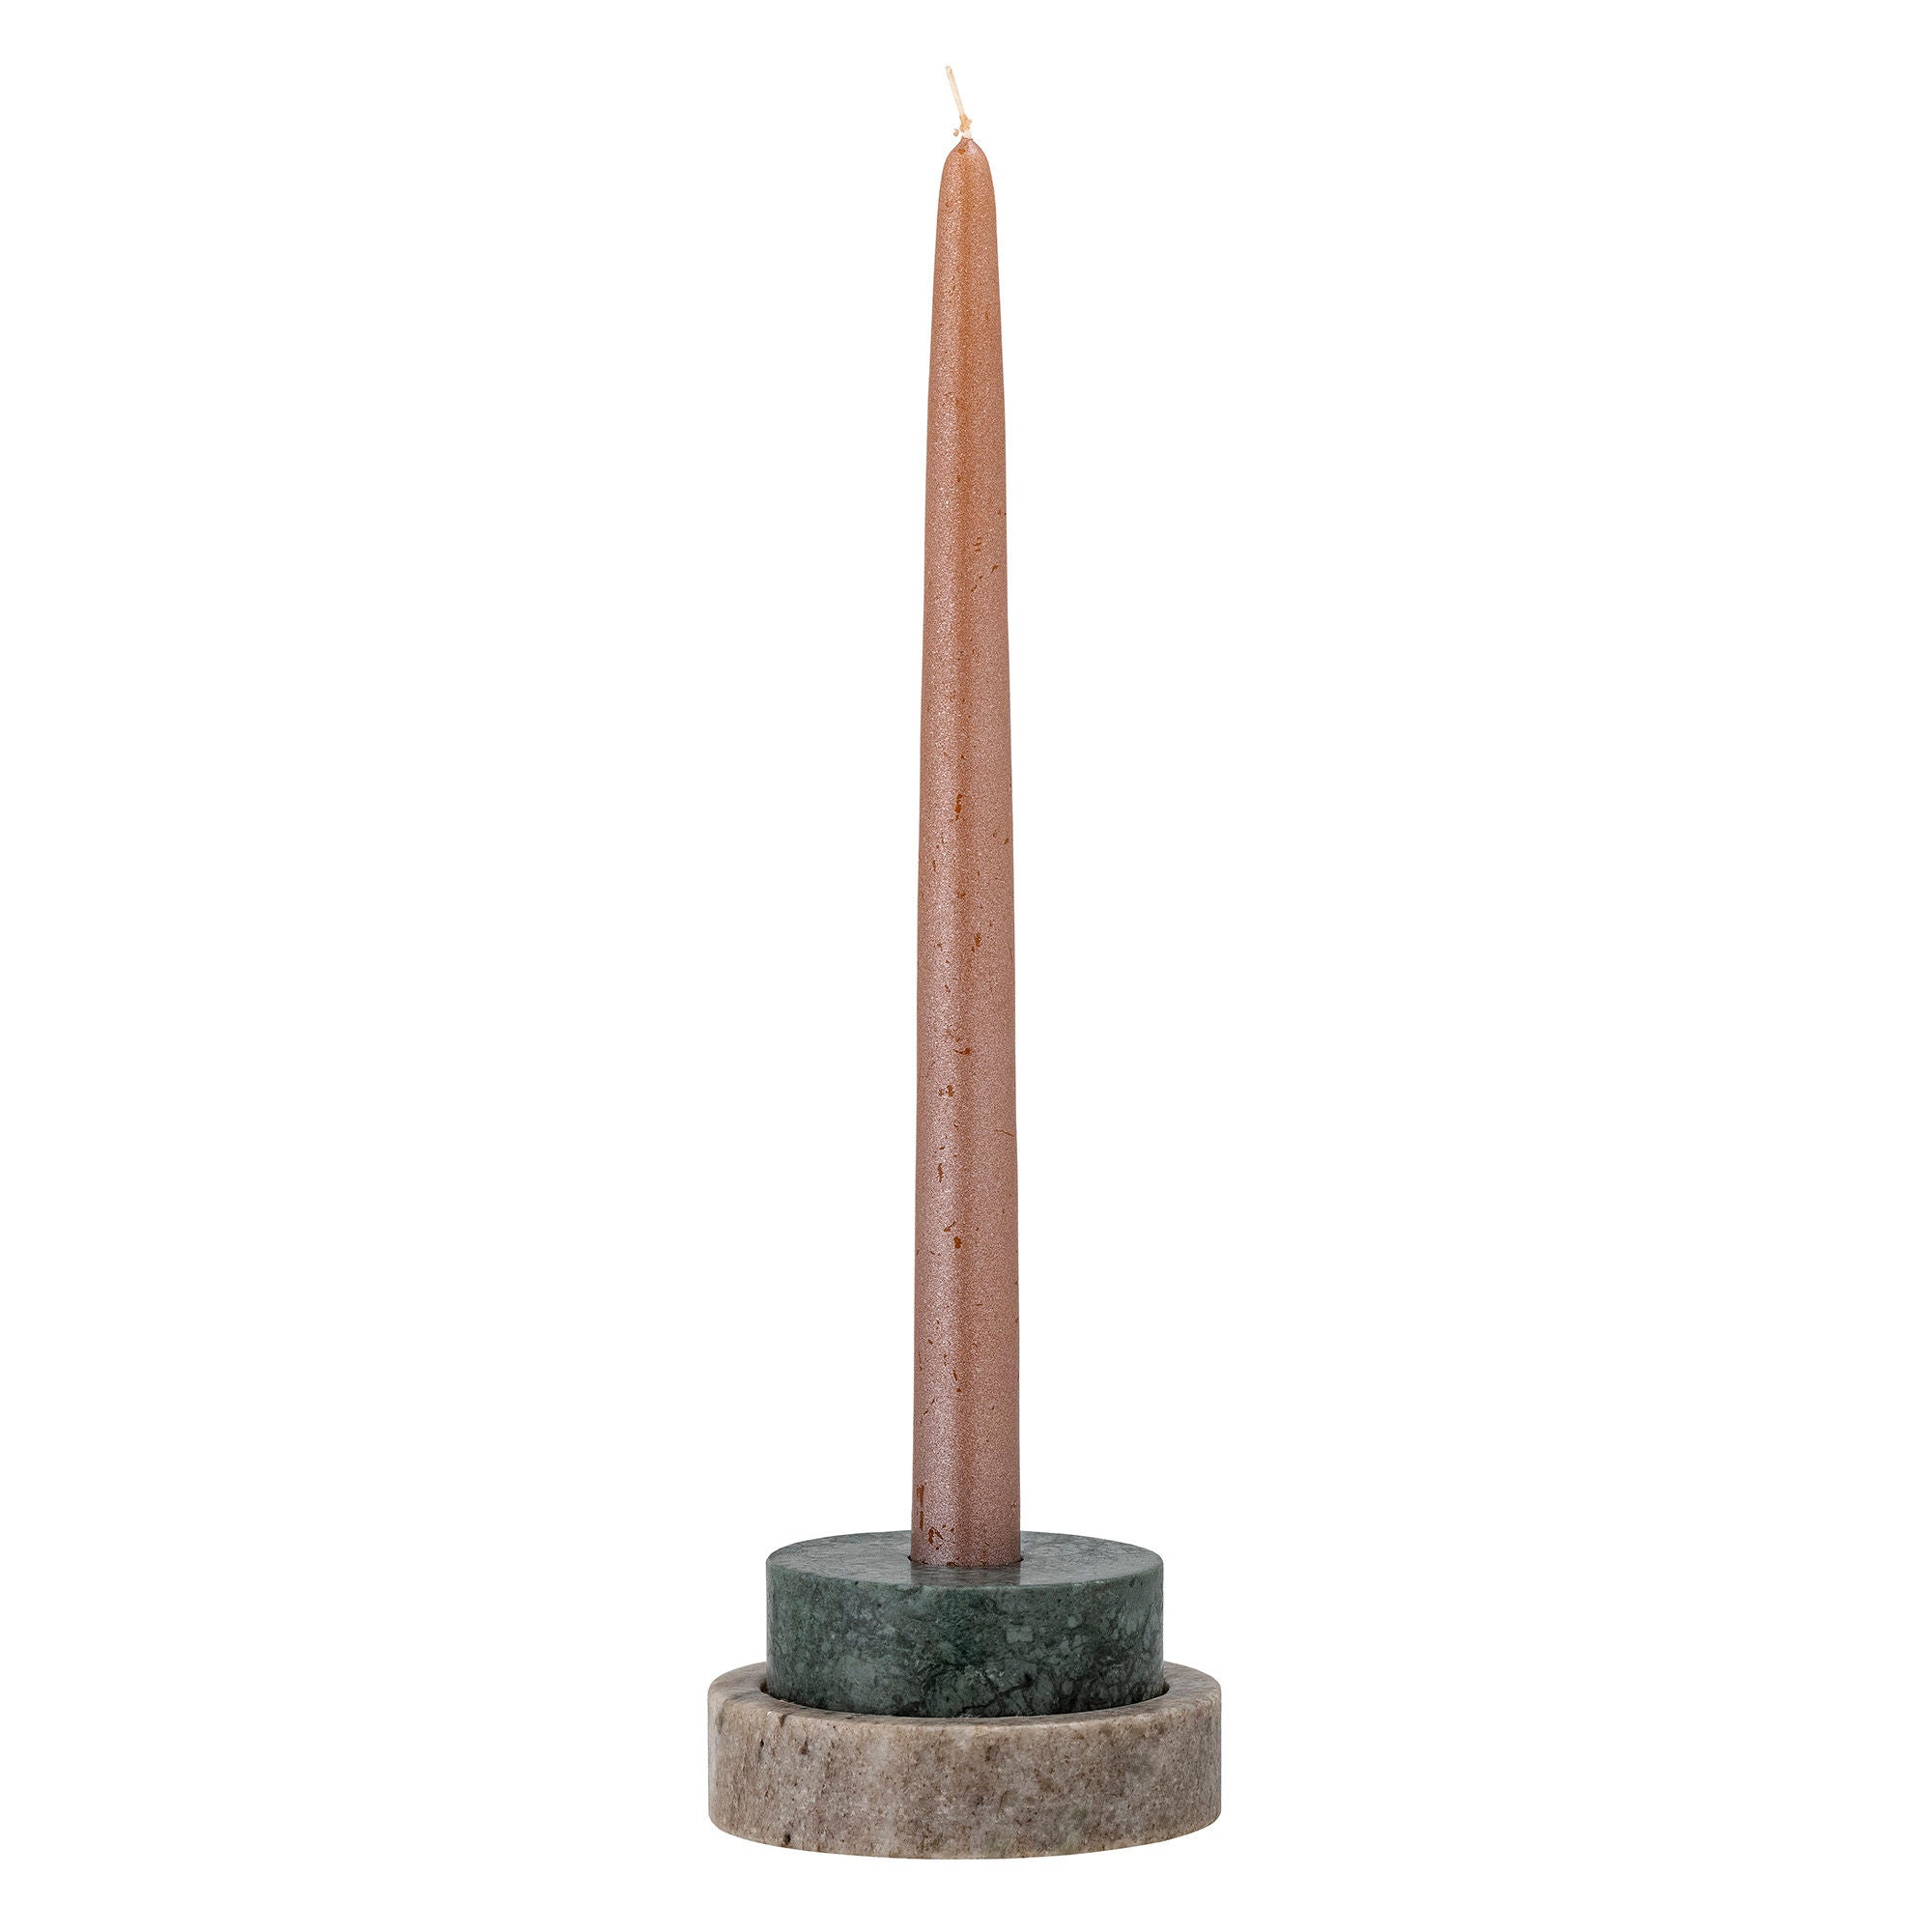 Bloomingville Dalin Votive & Candle Holder, Green, Marble